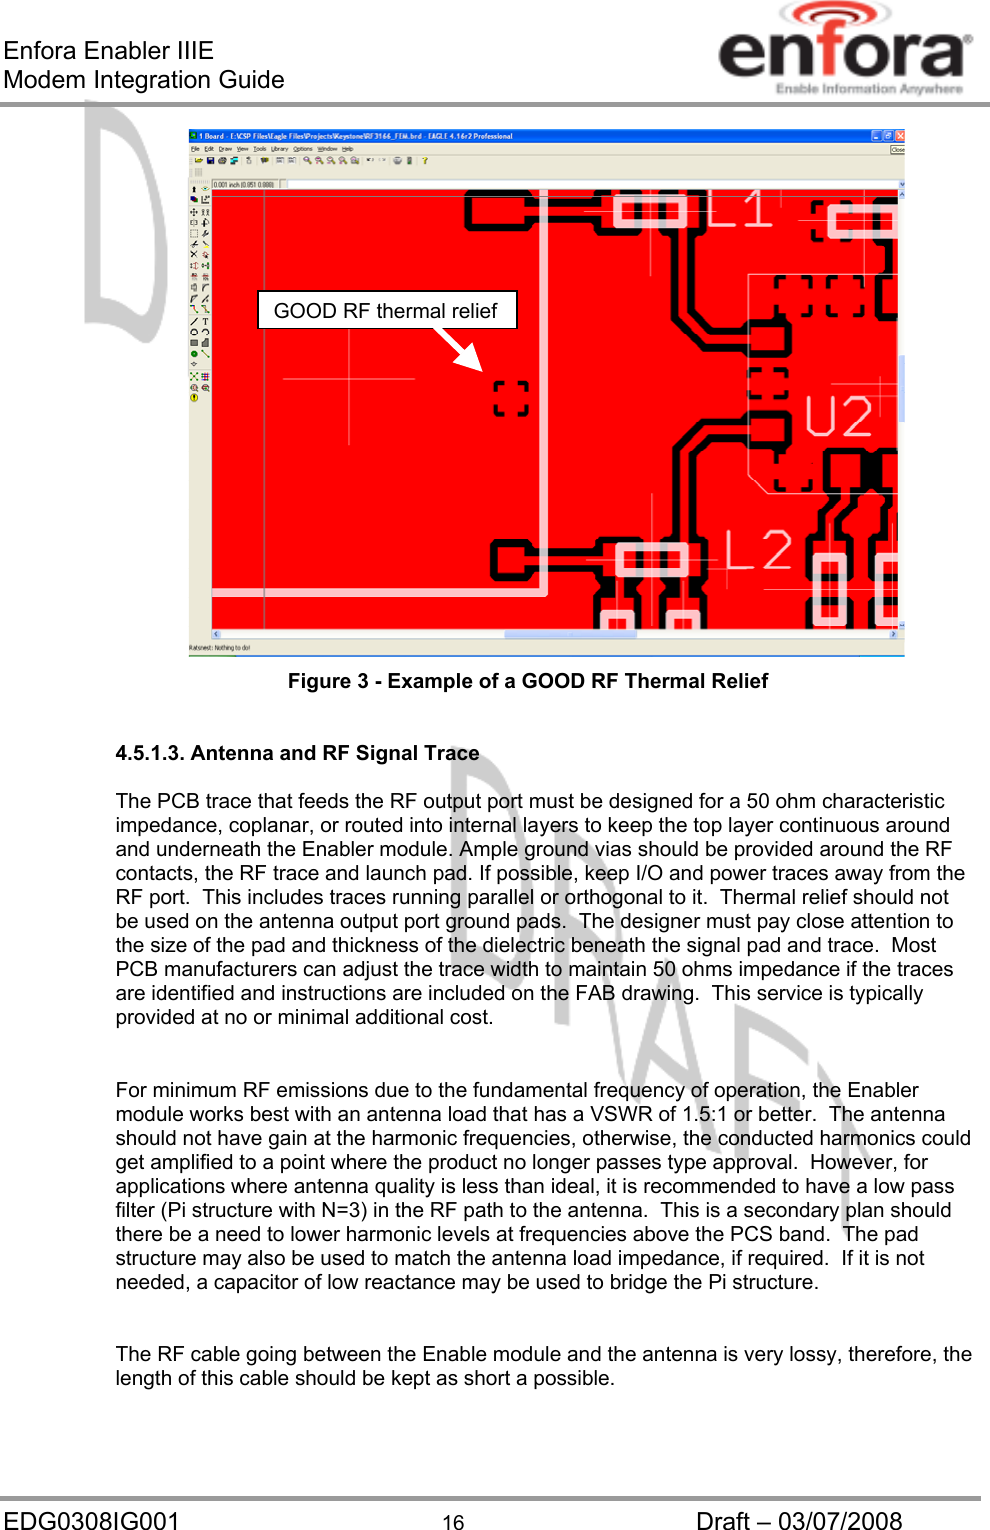 Enfora Enabler IIIE Modem Integration Guide GOOD RF thermal relief Figure 3 - Example of a GOOD RF Thermal Relief  4.5.1.3. Antenna and RF Signal Trace  The PCB trace that feeds the RF output port must be designed for a 50 ohm characteristic impedance, coplanar, or routed into internal layers to keep the top layer continuous around and underneath the Enabler module. Ample ground vias should be provided around the RF contacts, the RF trace and launch pad. If possible, keep I/O and power traces away from the RF port.  This includes traces running parallel or orthogonal to it.  Thermal relief should not be used on the antenna output port ground pads.  The designer must pay close attention to the size of the pad and thickness of the dielectric beneath the signal pad and trace.  Most PCB manufacturers can adjust the trace width to maintain 50 ohms impedance if the traces are identified and instructions are included on the FAB drawing.  This service is typically provided at no or minimal additional cost.  For minimum RF emissions due to the fundamental frequency of operation, the Enabler module works best with an antenna load that has a VSWR of 1.5:1 or better.  The antenna should not have gain at the harmonic frequencies, otherwise, the conducted harmonics could get amplified to a point where the product no longer passes type approval.  However, for applications where antenna quality is less than ideal, it is recommended to have a low pass filter (Pi structure with N=3) in the RF path to the antenna.  This is a secondary plan should there be a need to lower harmonic levels at frequencies above the PCS band.  The pad structure may also be used to match the antenna load impedance, if required.  If it is not needed, a capacitor of low reactance may be used to bridge the Pi structure.  The RF cable going between the Enable module and the antenna is very lossy, therefore, the length of this cable should be kept as short a possible.  EDG0308IG001  16  Draft – 03/07/2008 